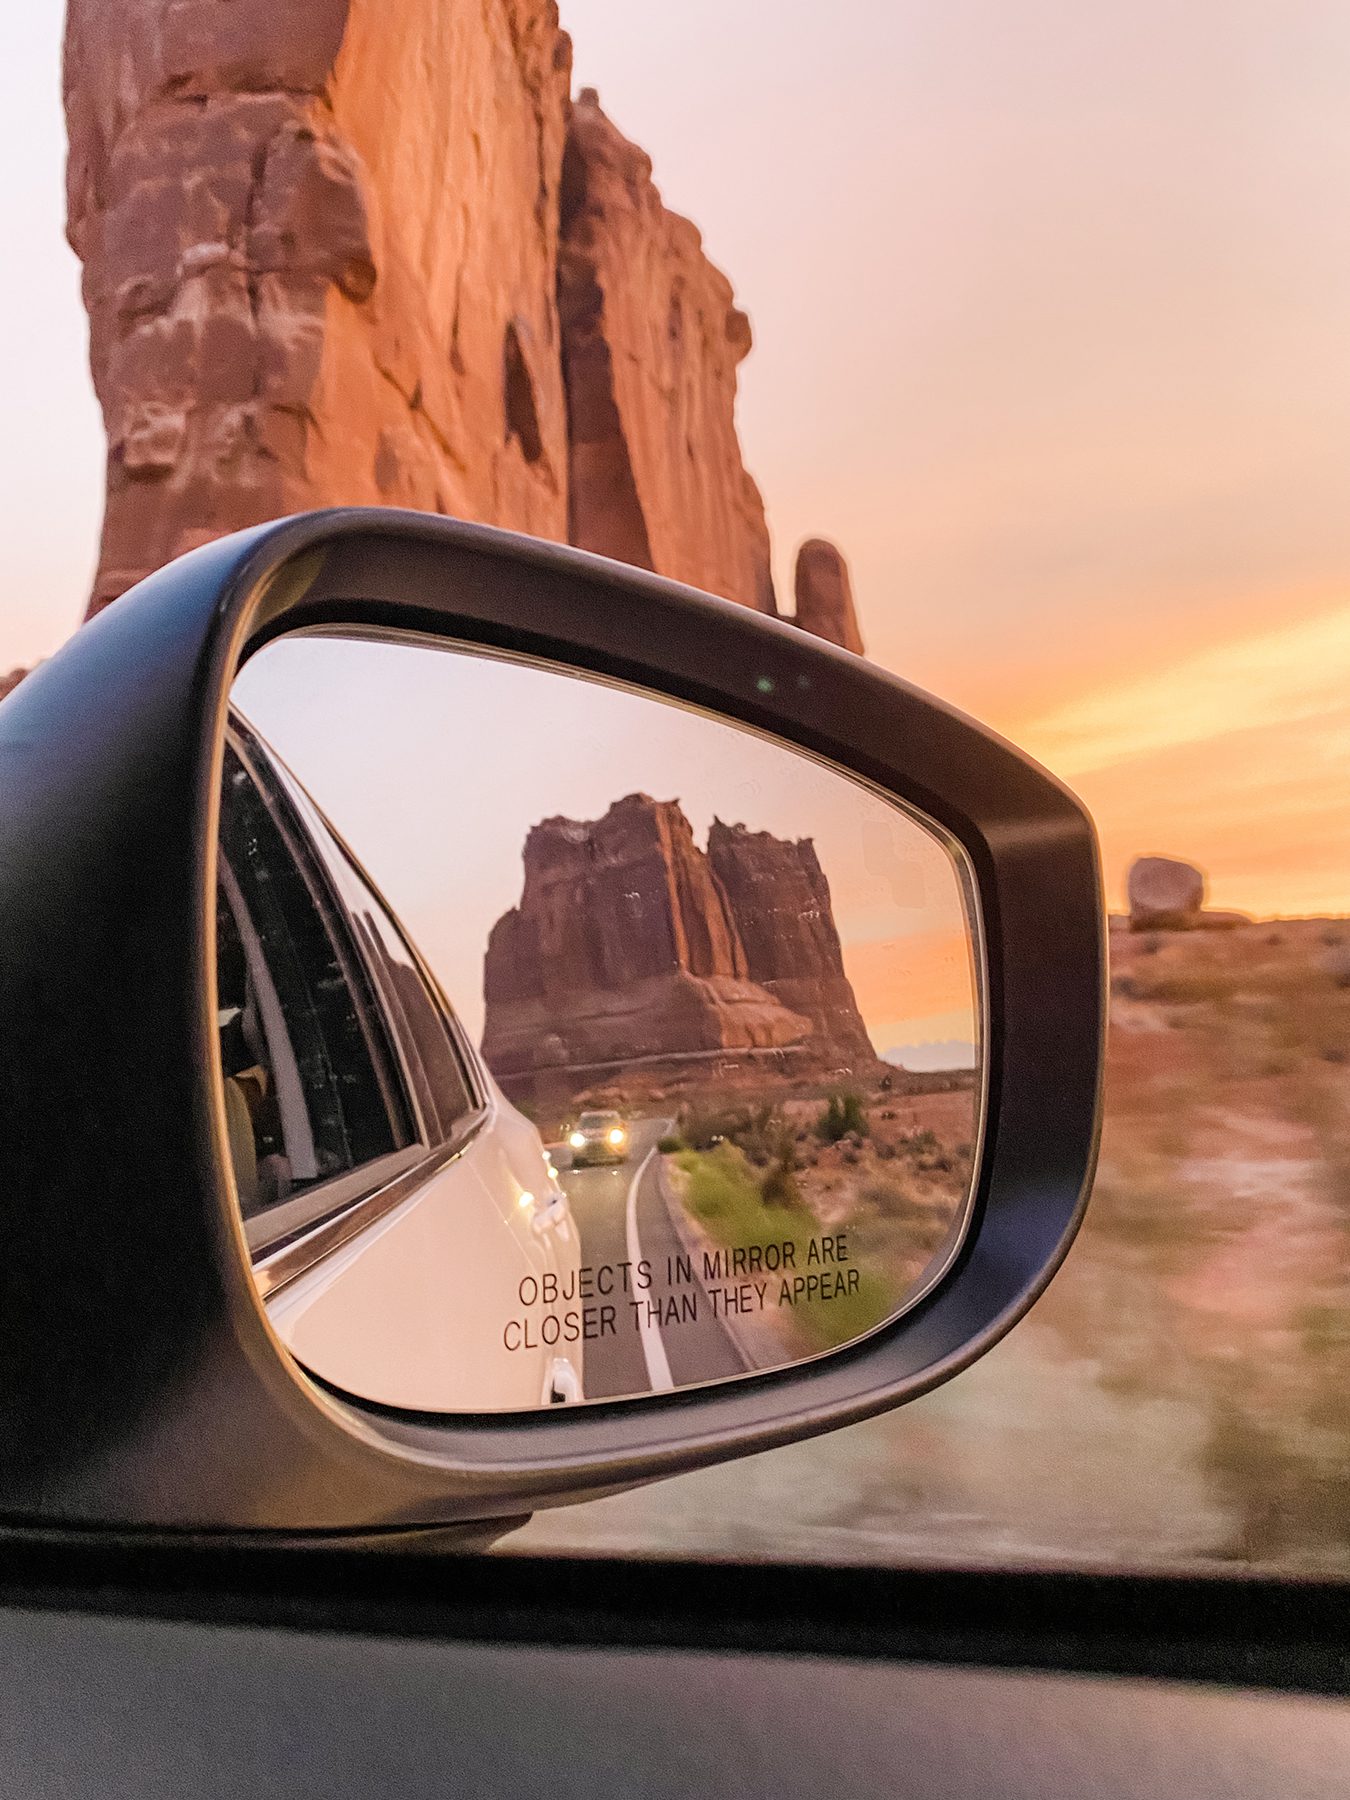 Grand canyon in the review mirror of a car